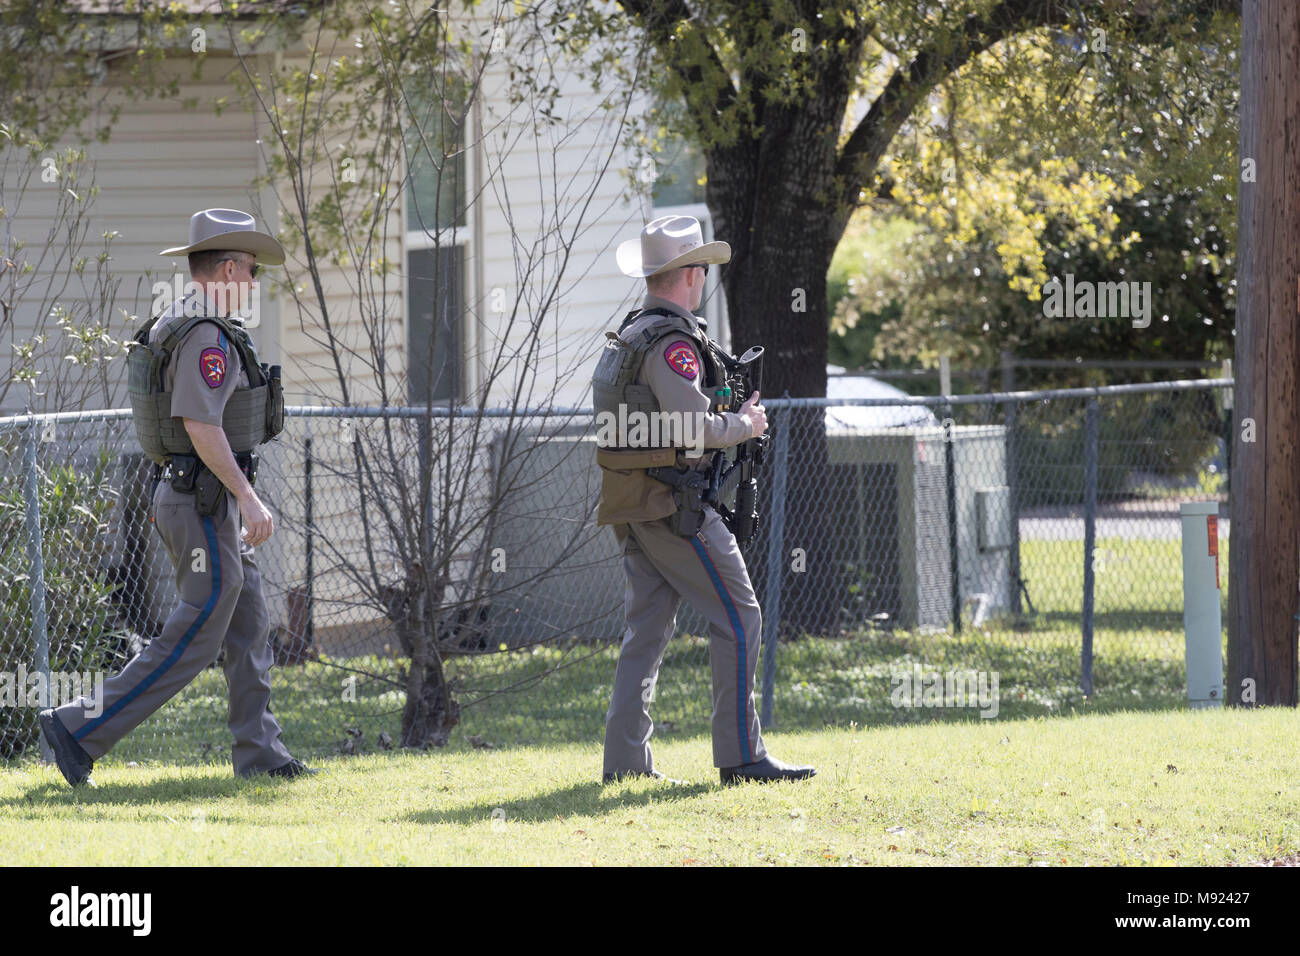 Texas state troopers help secure the Pflugerville, TX, neighborhood around the home of Mark Conditt, who was the suspected serial bomber terrorizing Austin for three weeks. Conditt killed himself earlier in the day during a car chase as officers closed in. Stock Photo